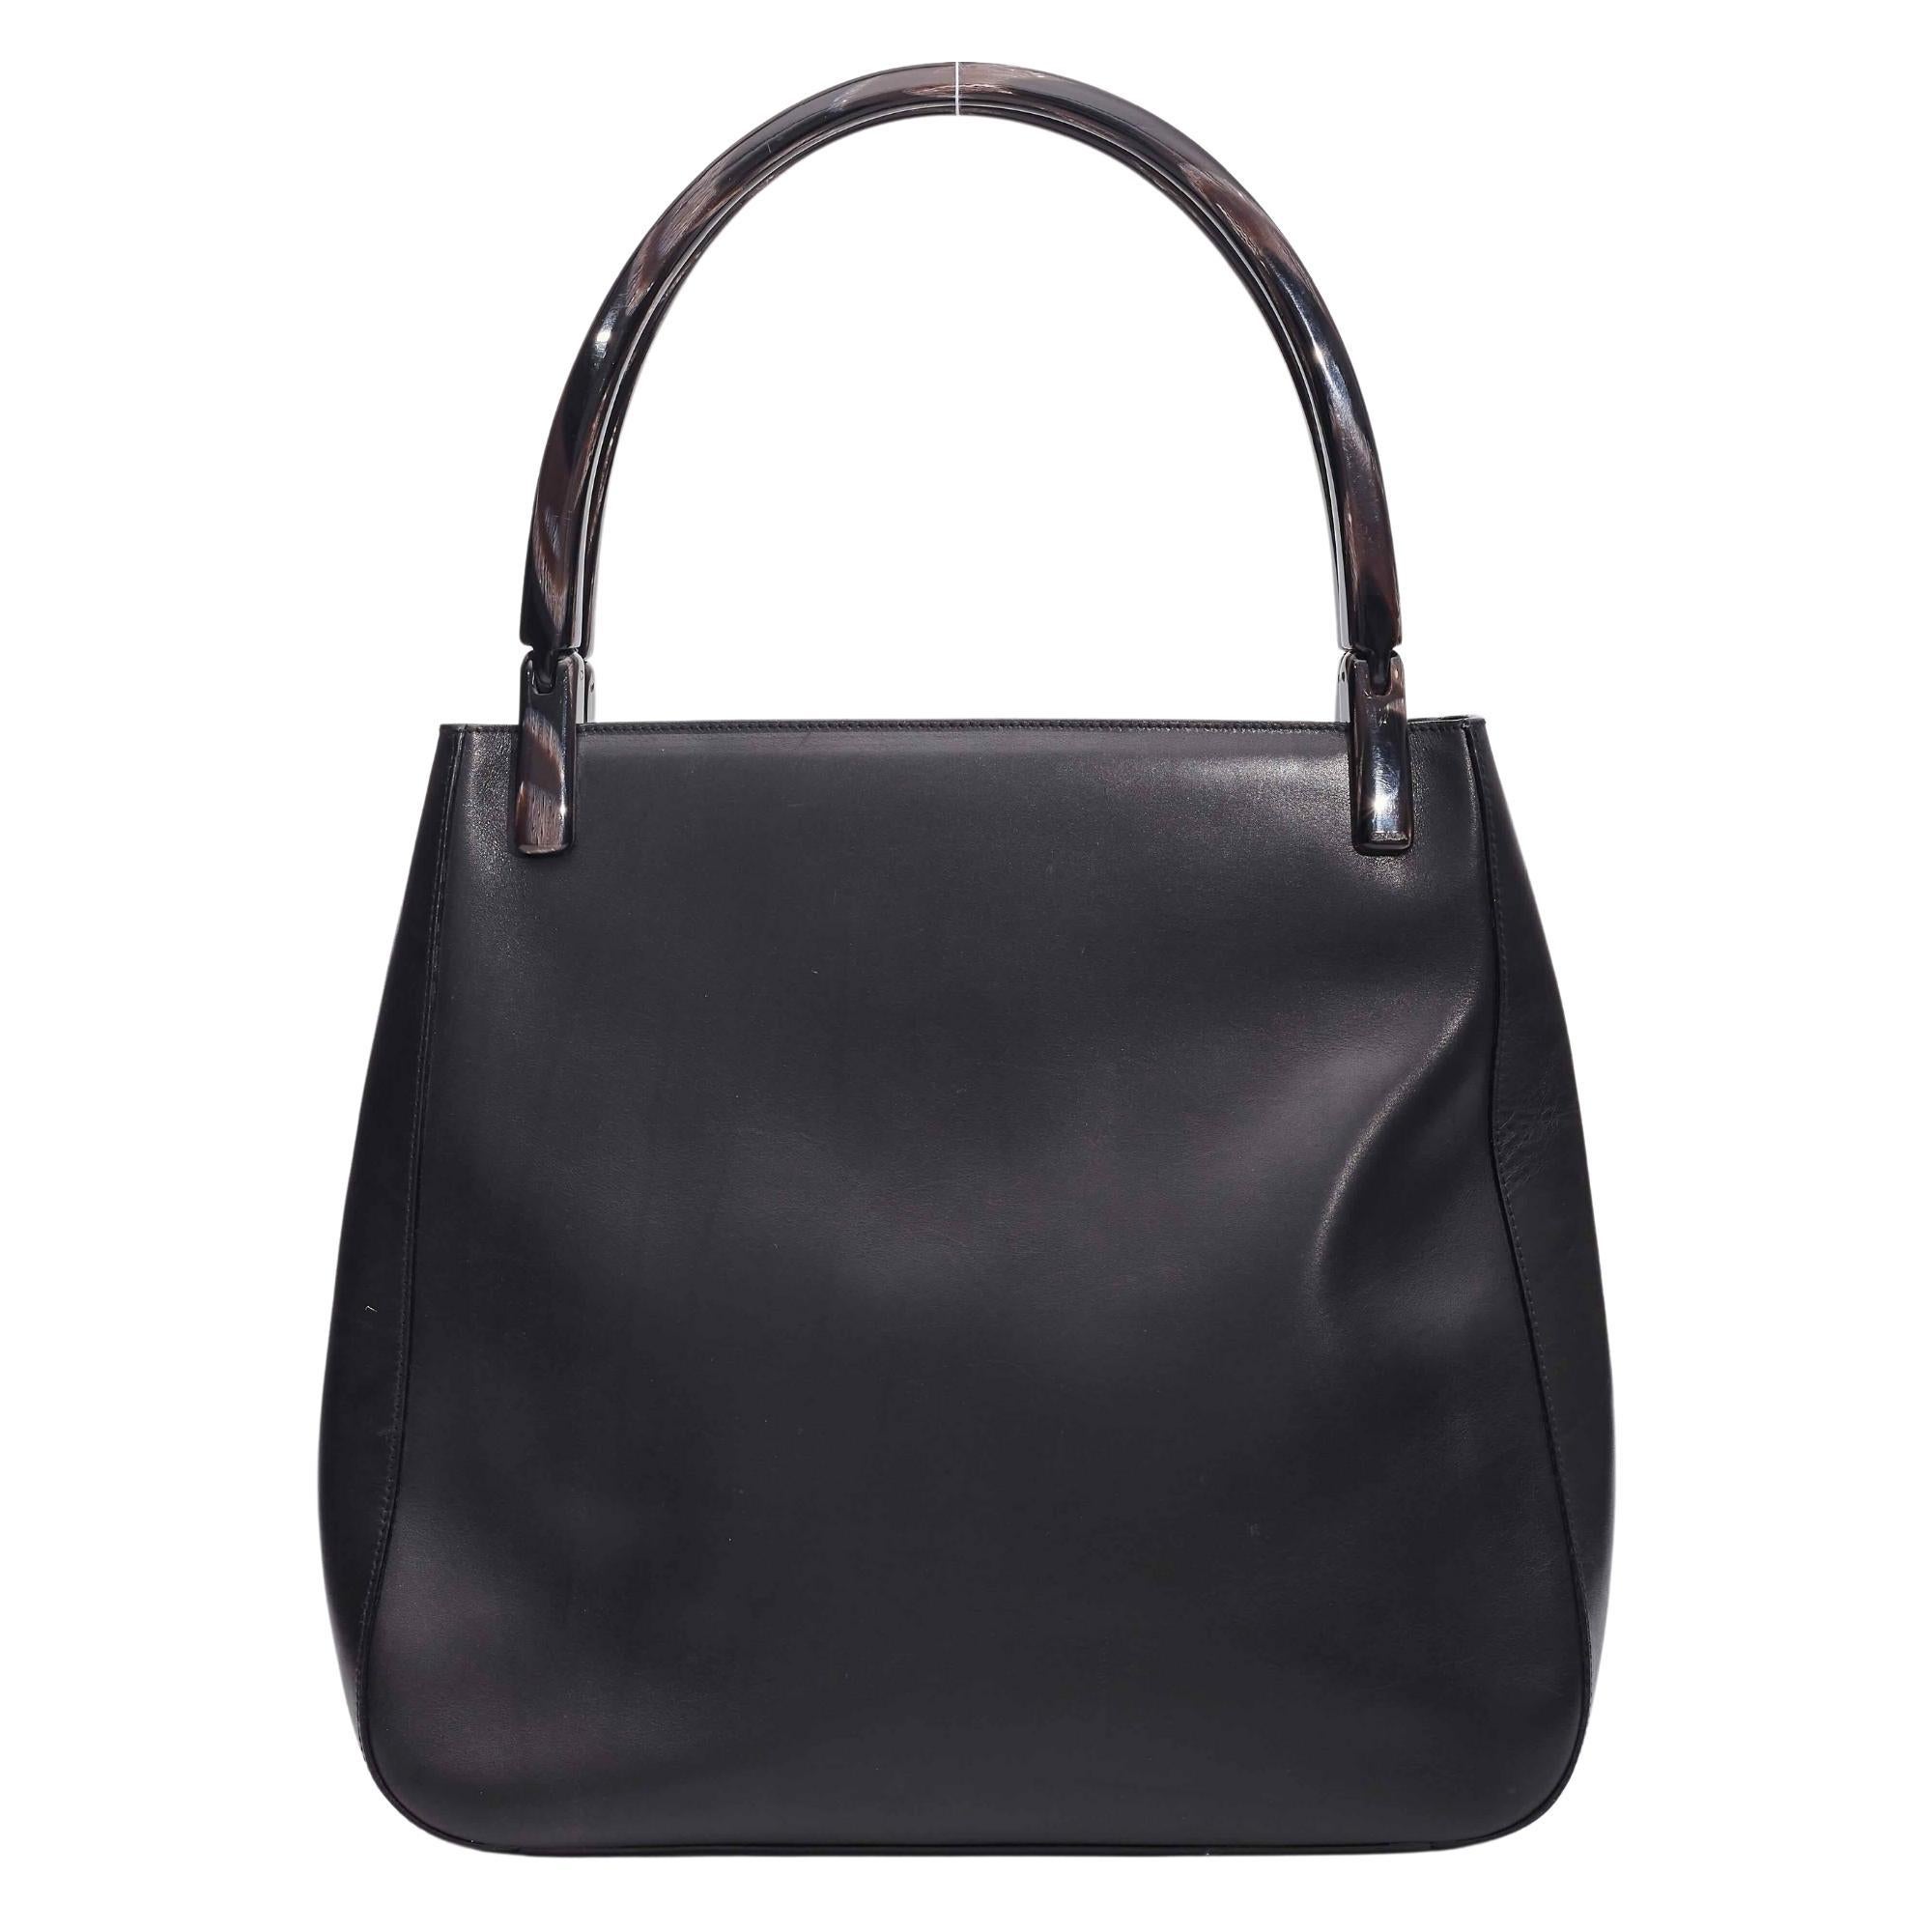 Prada Black Leather Acrylic Handle Tote. This tote from Prada features a leather construction, dual acrylic top handles, silver tone hardware and nylon logo lining.

Color: Black
Material: Leather
Code: 117
Measures: Height 11” x Length  12” x Depth